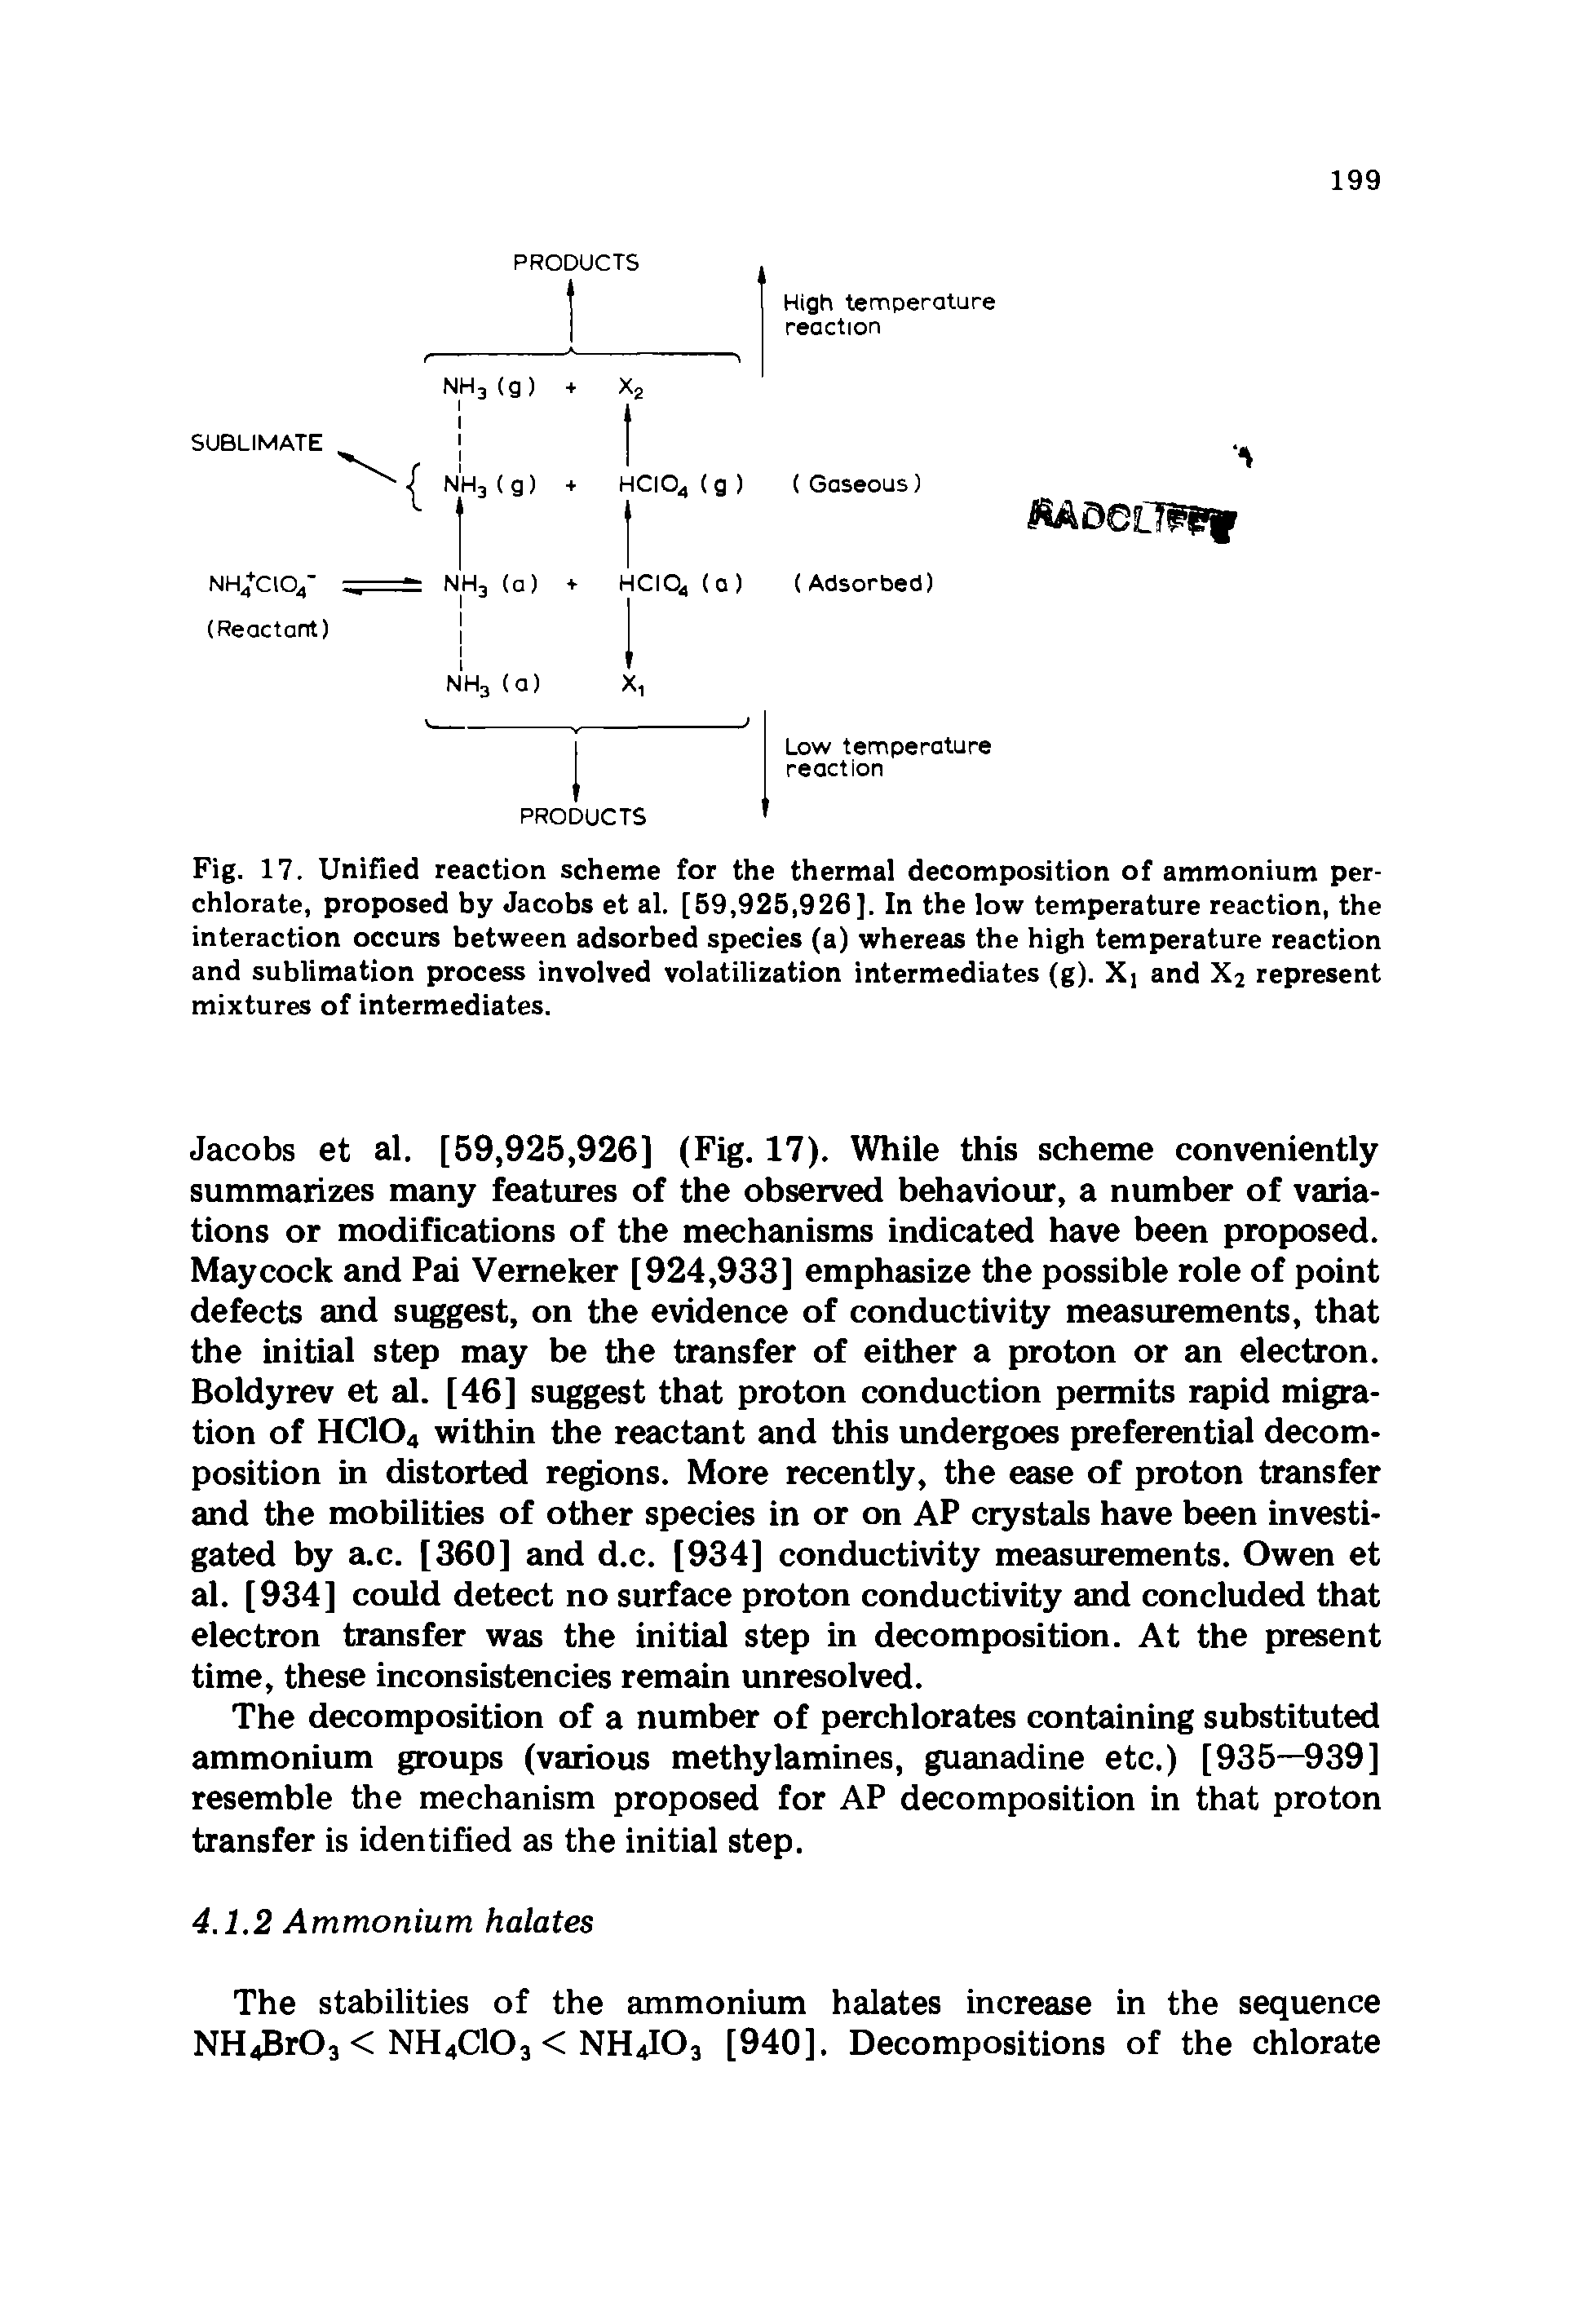 Fig. 17. Unified reaction scheme for the thermal decomposition of ammonium perchlorate, proposed by Jacobs et al. [59,925,926], In the low temperature reaction, the interaction occurs between adsorbed species (a) whereas the high temperature reaction and sublimation process involved volatilization intermediates (g). X] and X2 represent mixtures of intermediates.